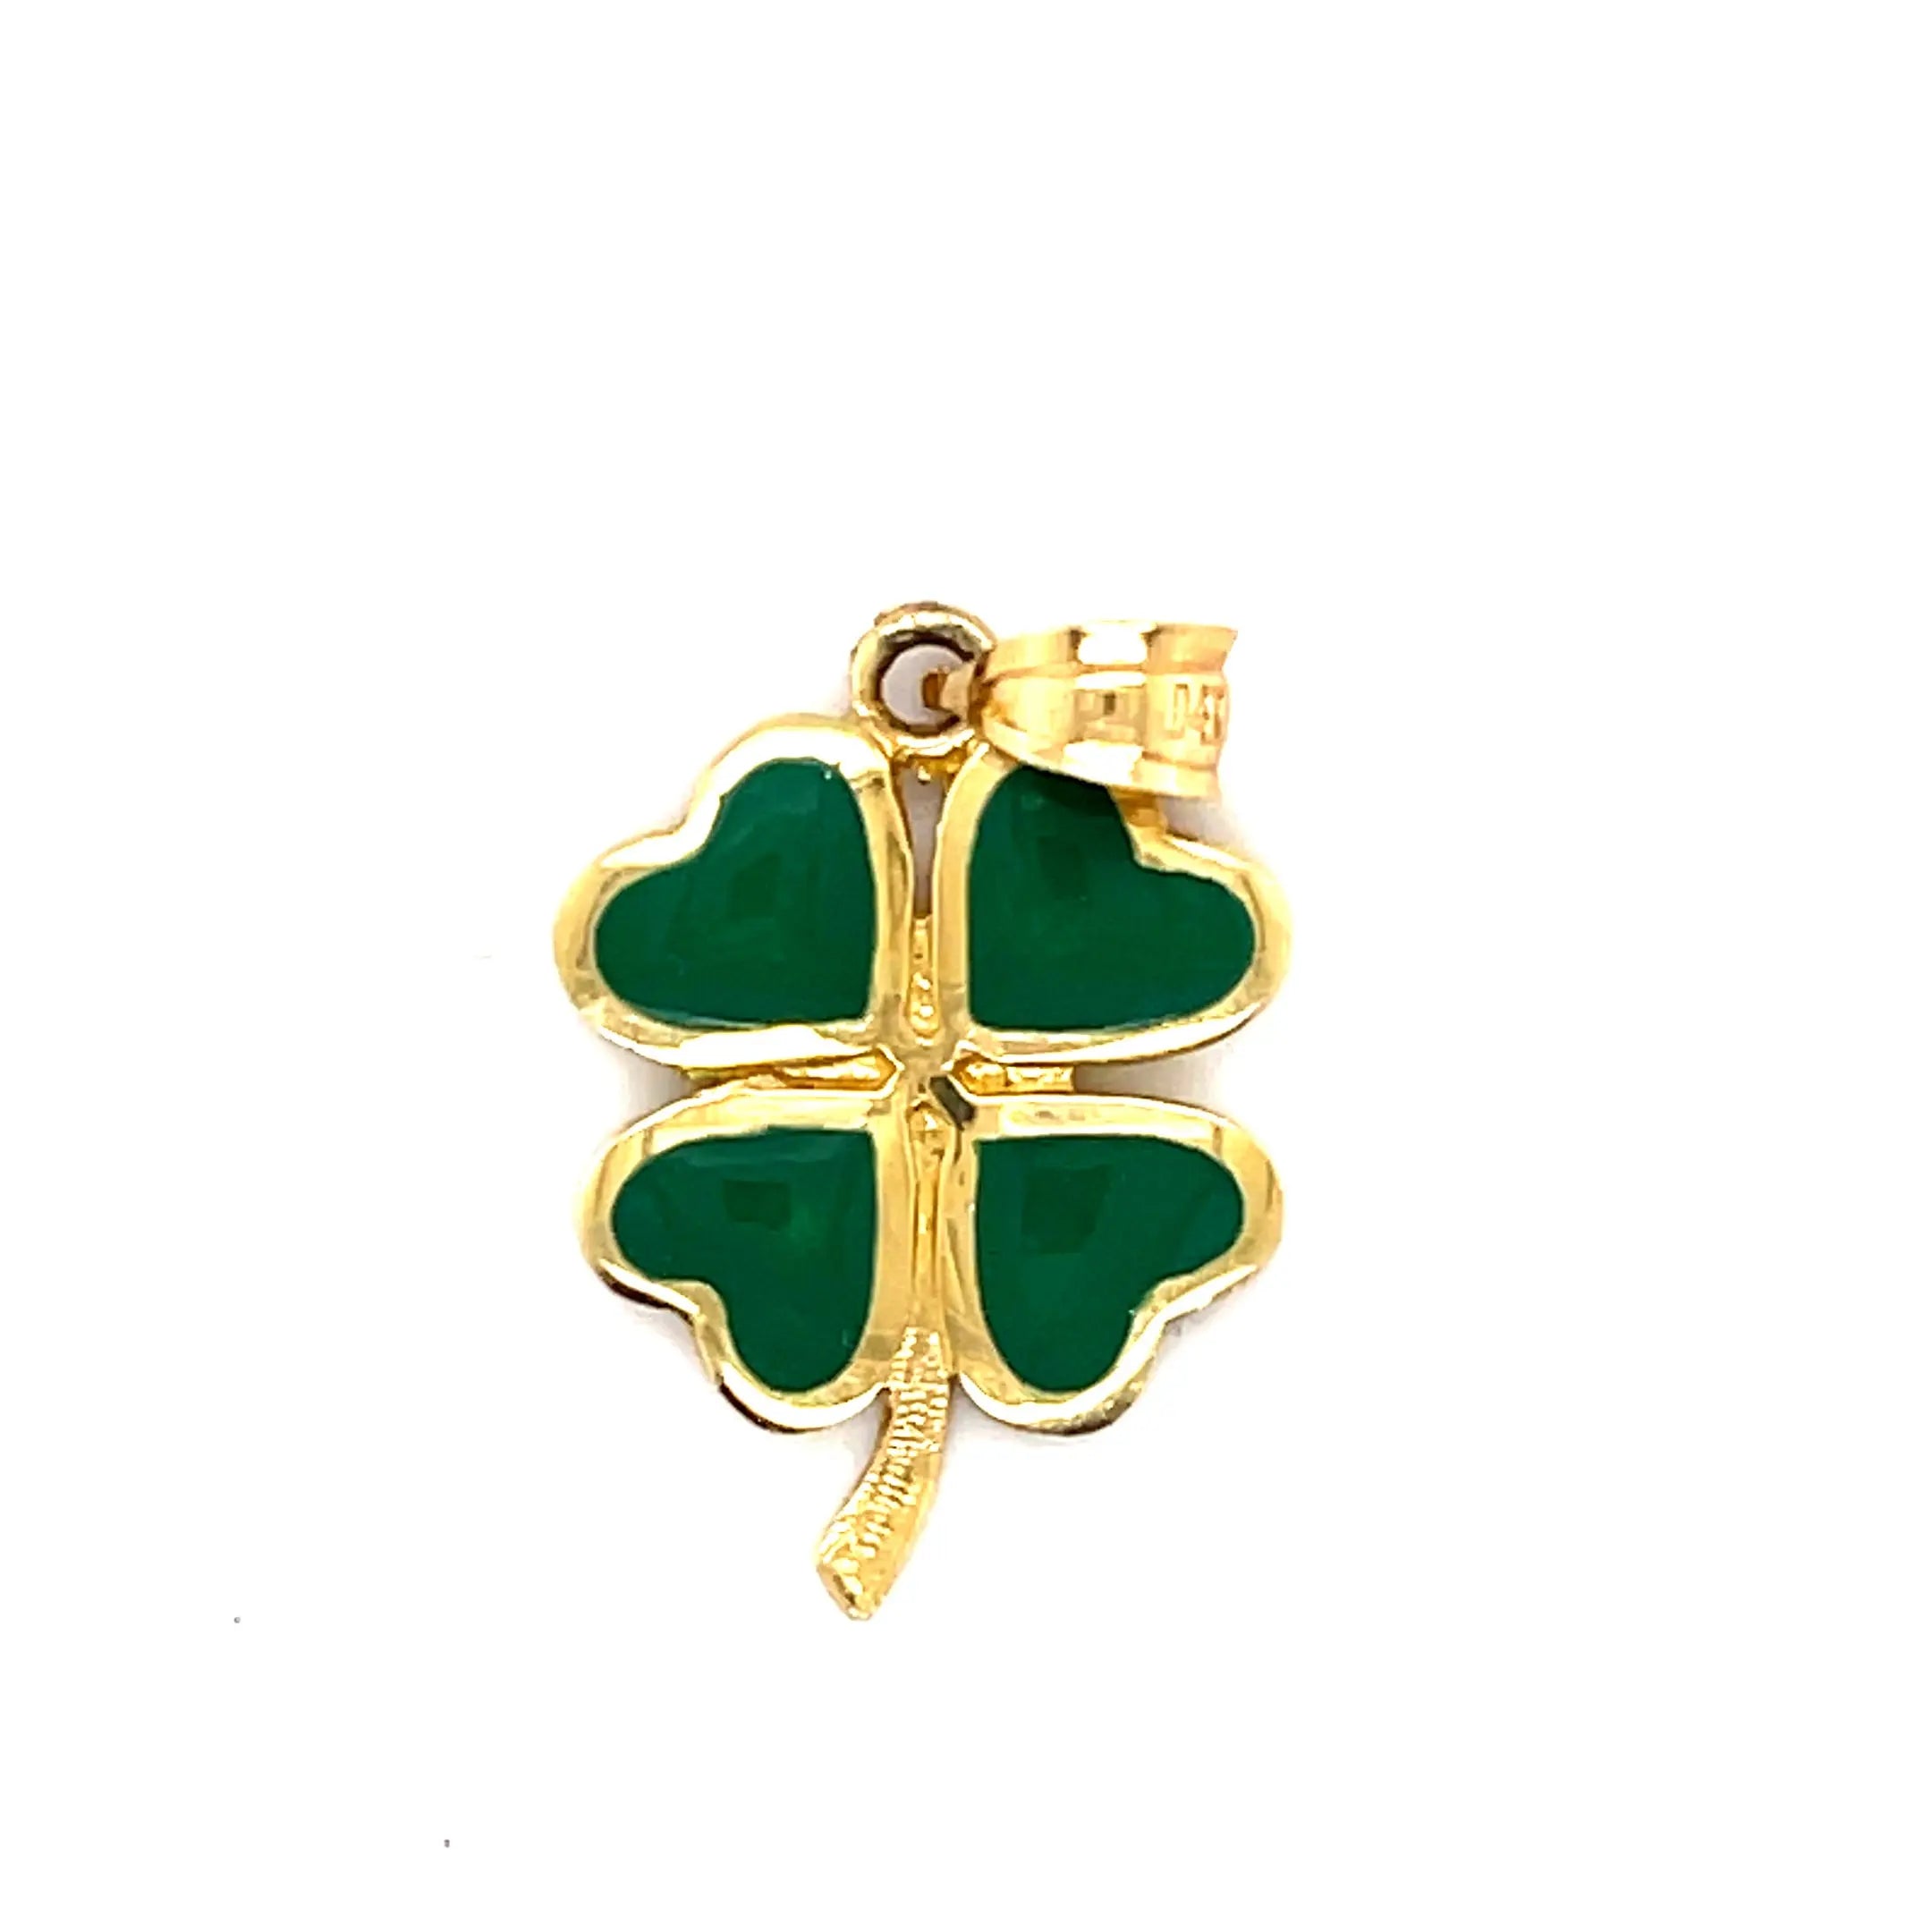 Vintage 14k yellow gold and green enamel Four Leaf Clover Pendant  Size: 1 inch x 1 inch  One of a Kind